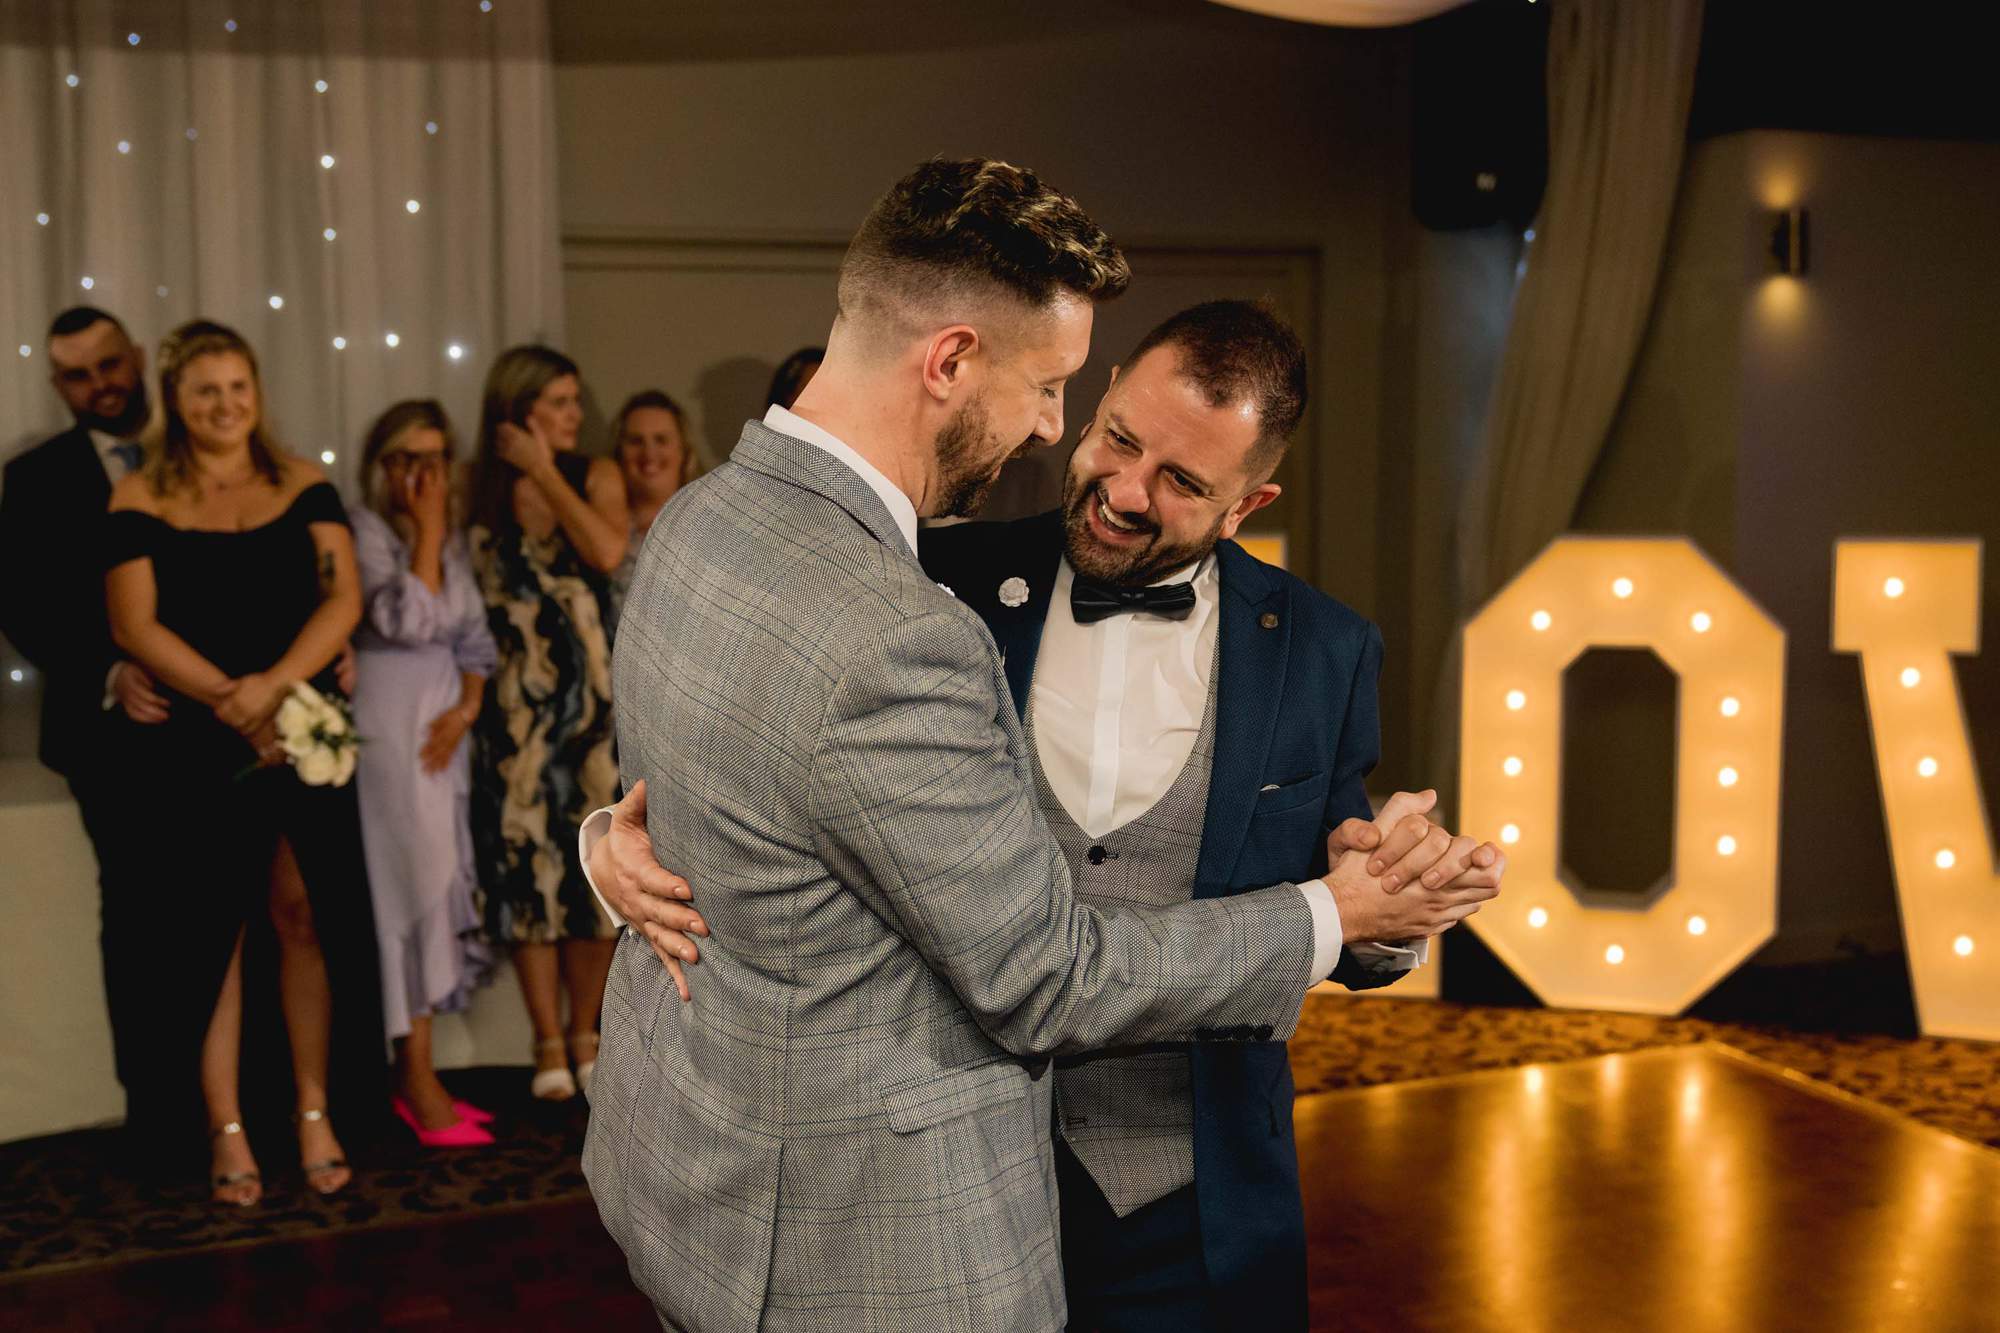 Two grooms have their first dance together on their wedding day at Wickwoods Country Club in East Sussex.